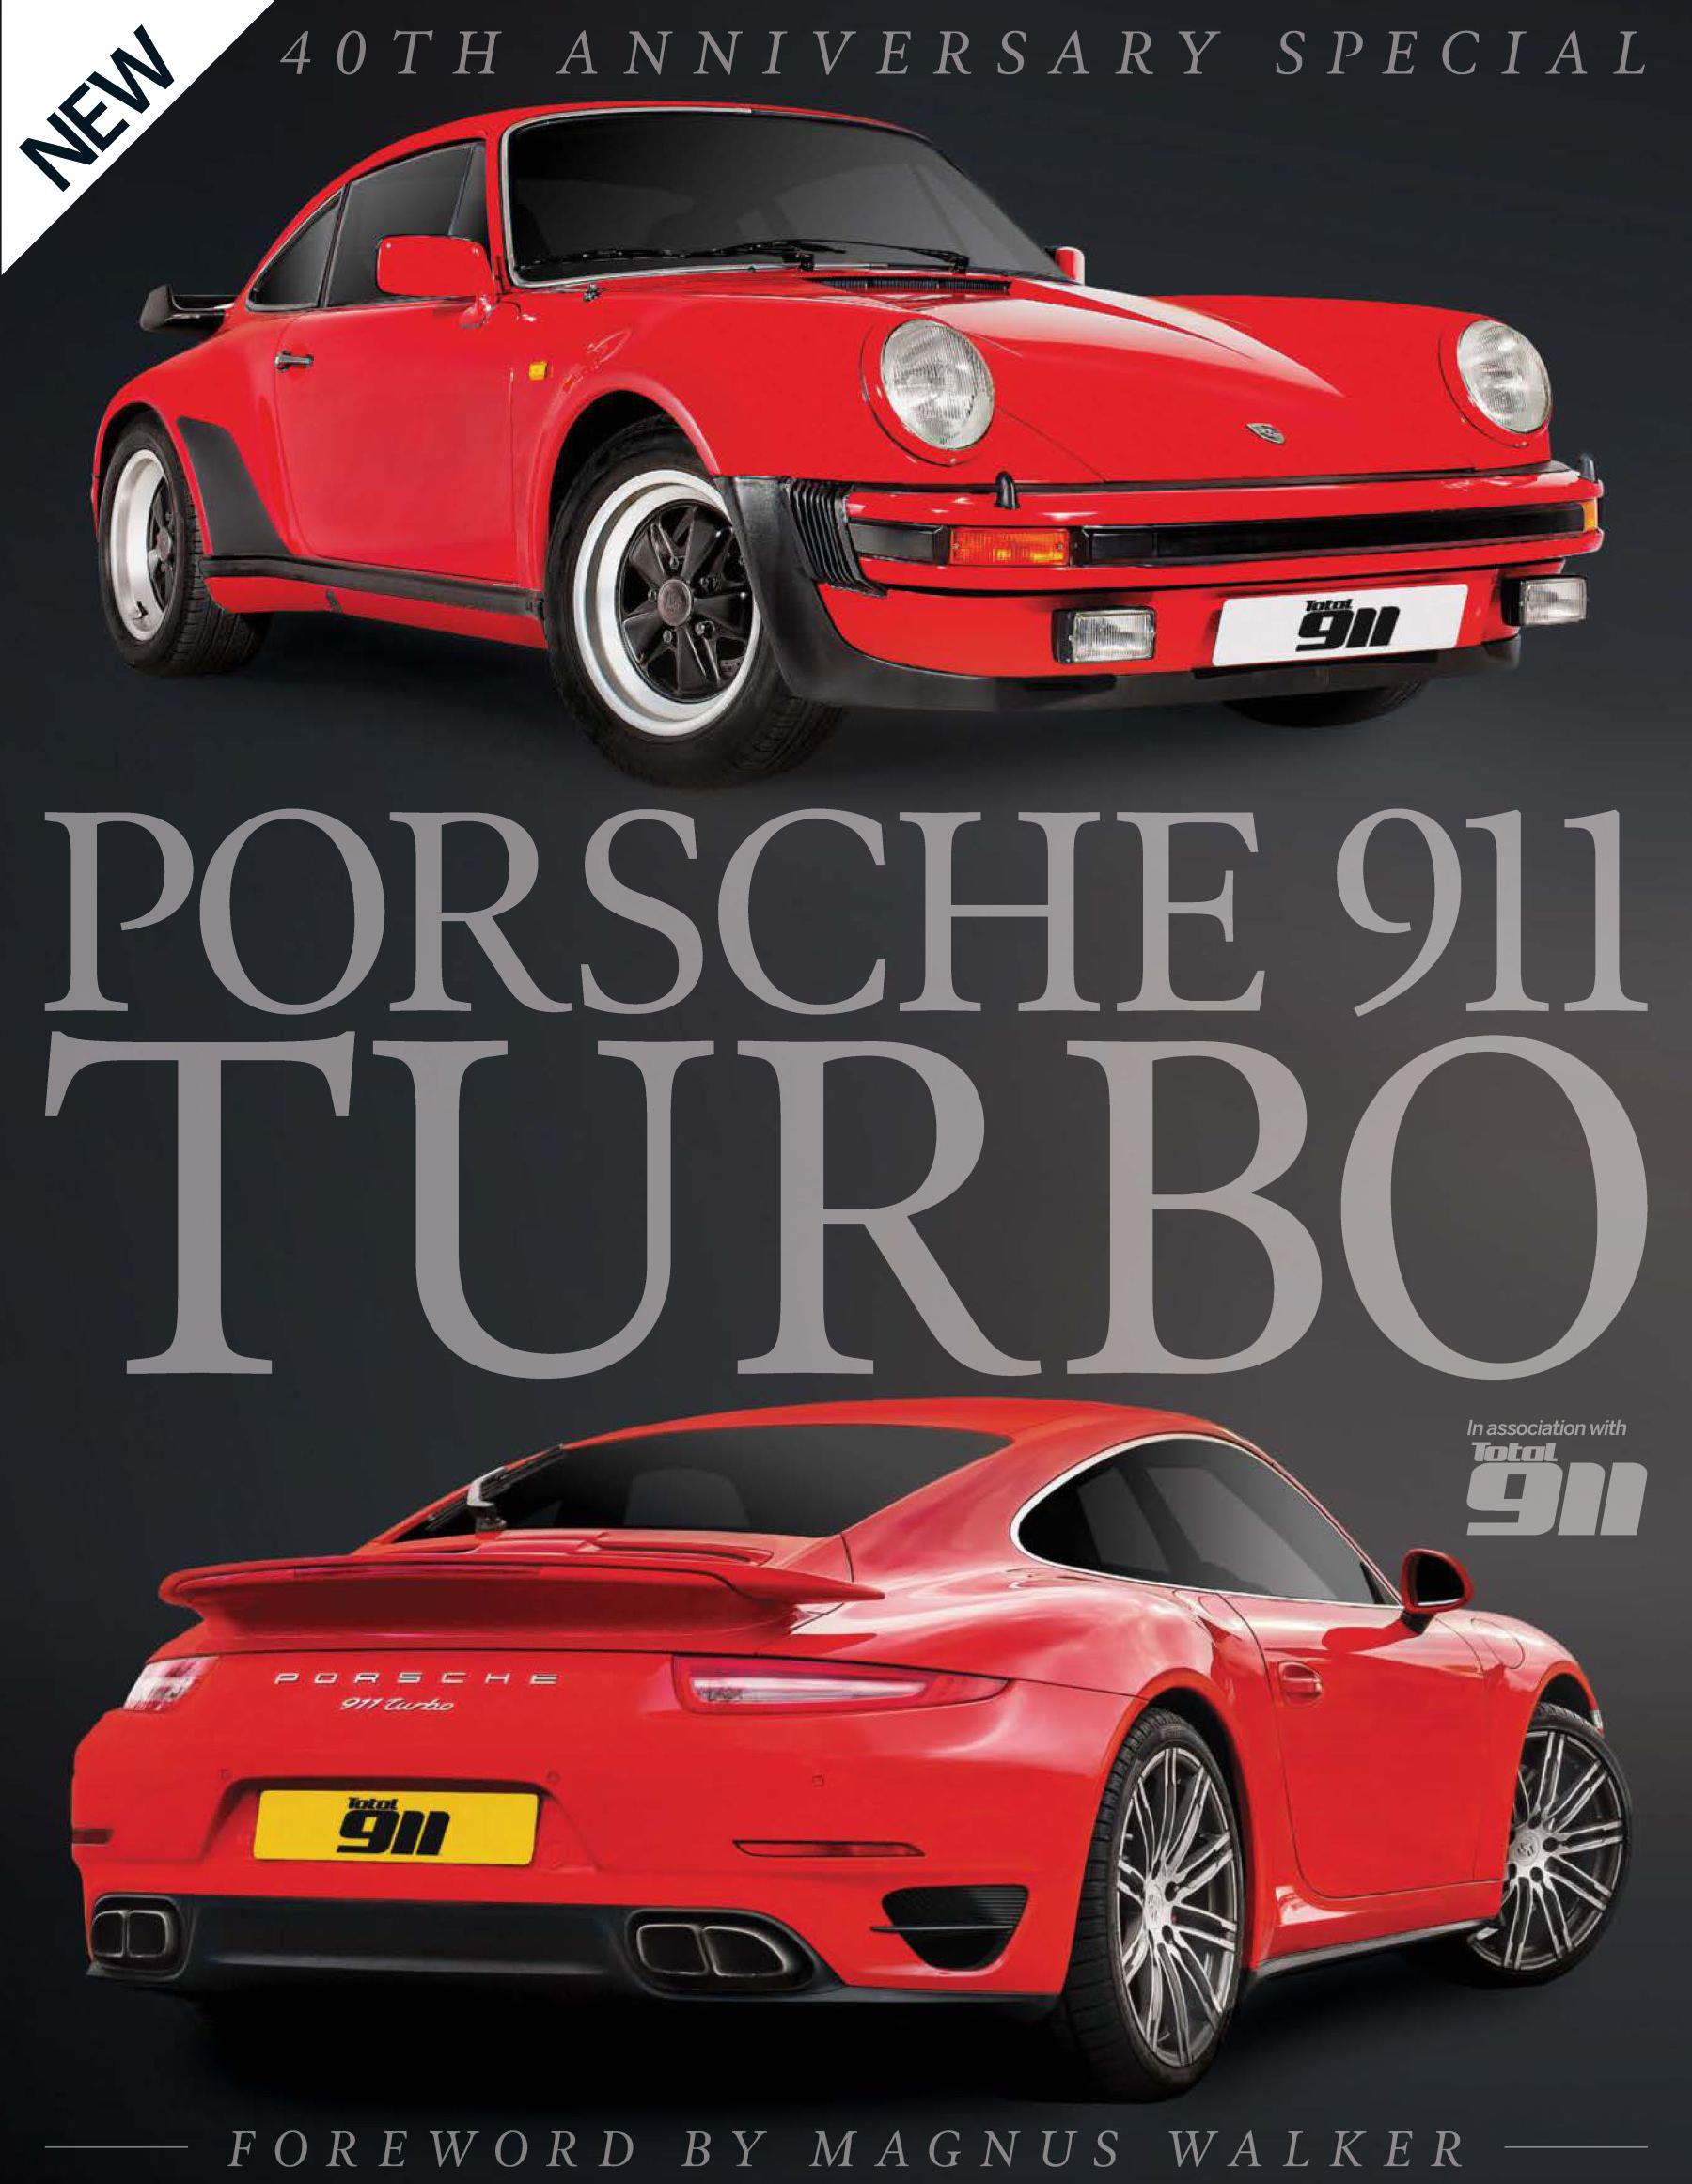 Журнал Porsche 911 Turbo: 40th anniversary special.(from the publishers of Total 911)